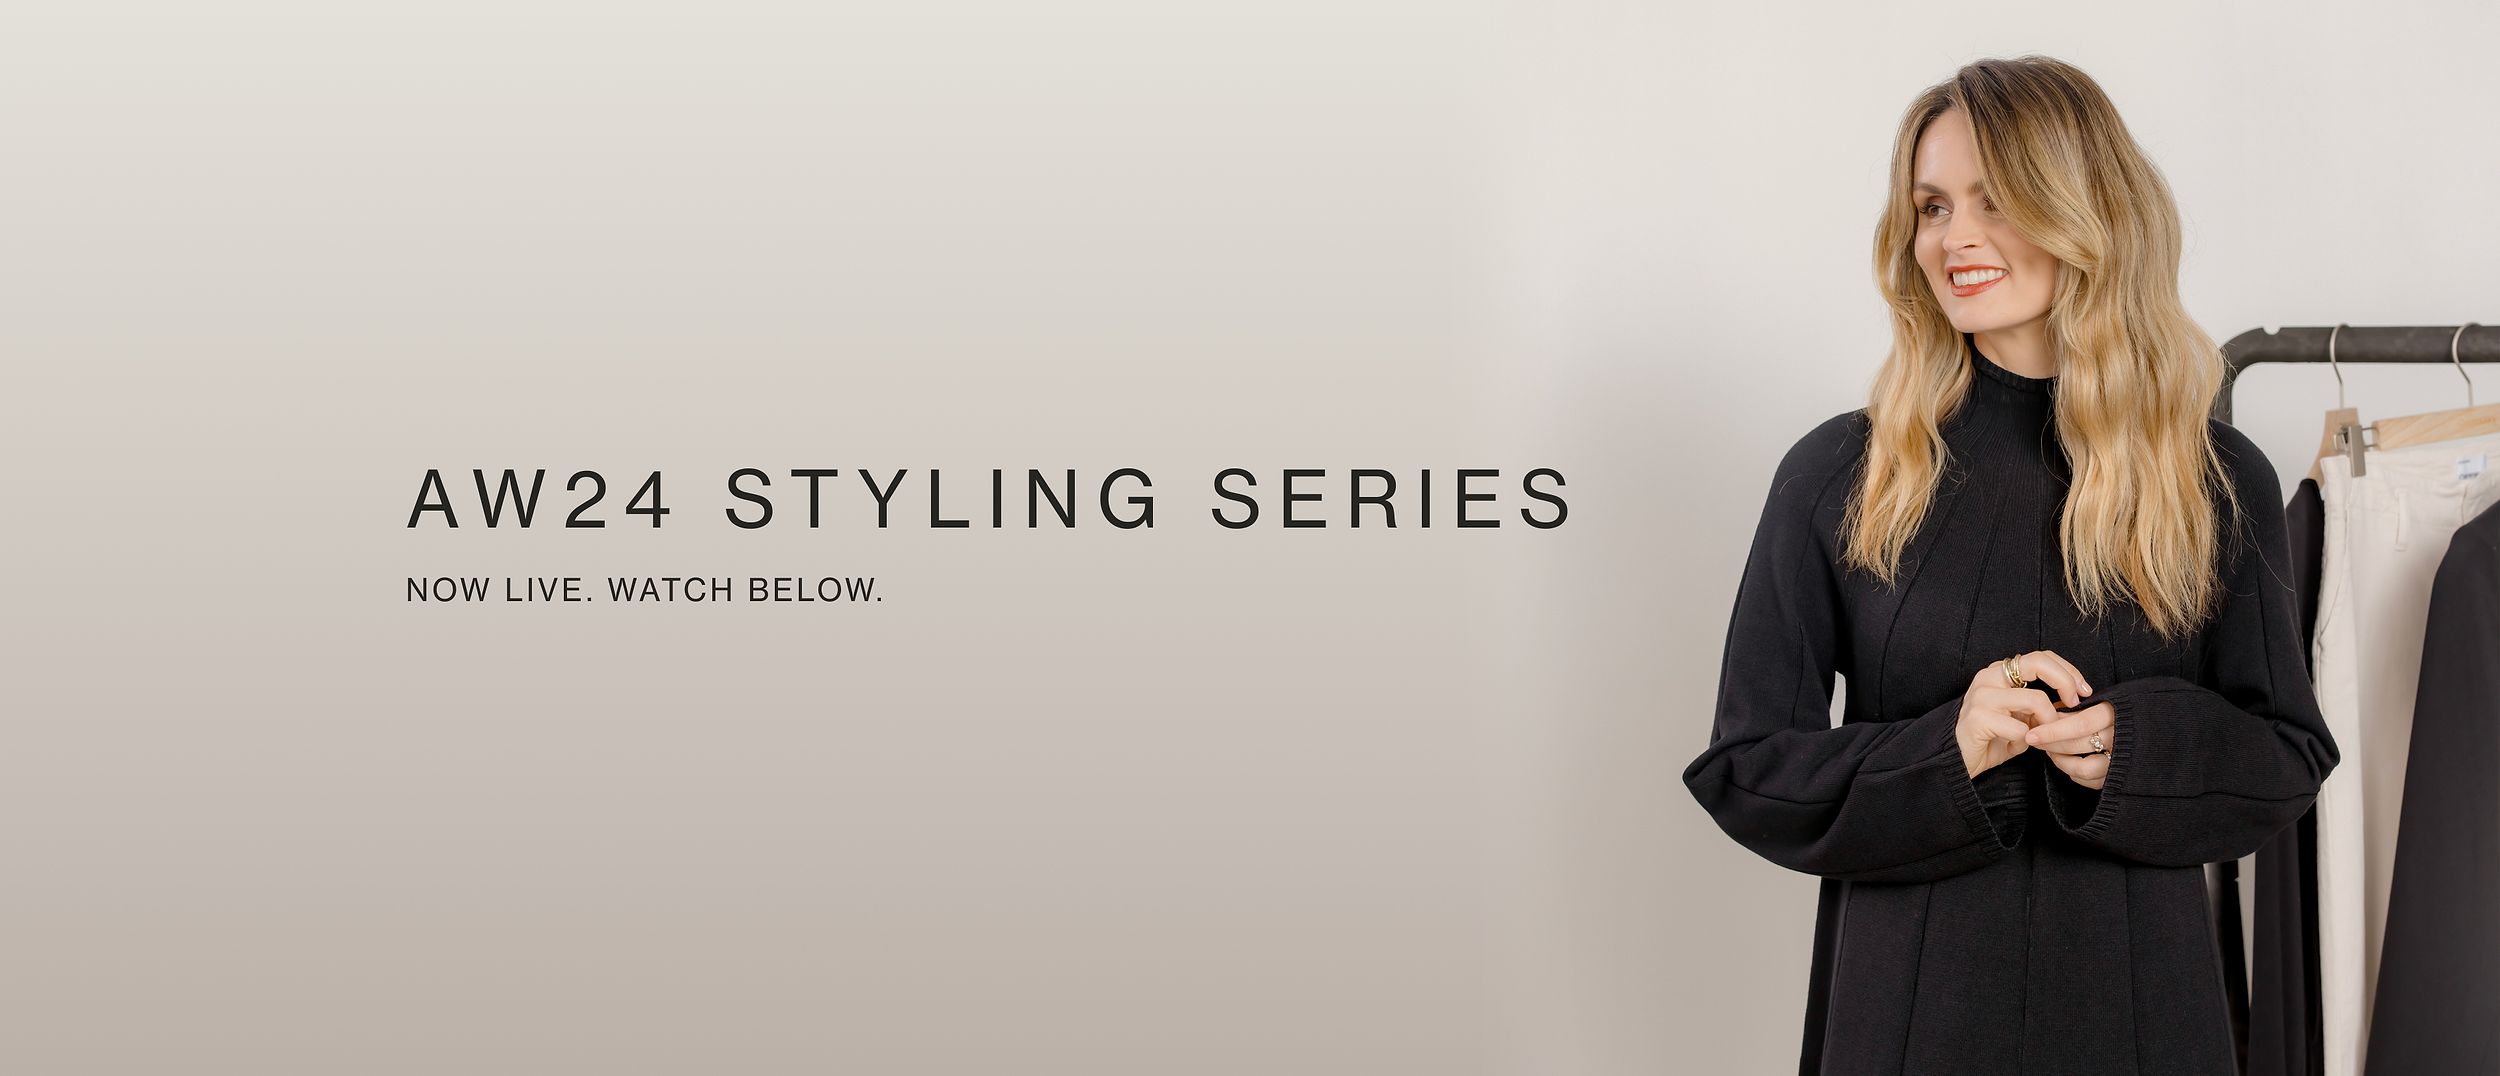 AW24 Digital Styling Series